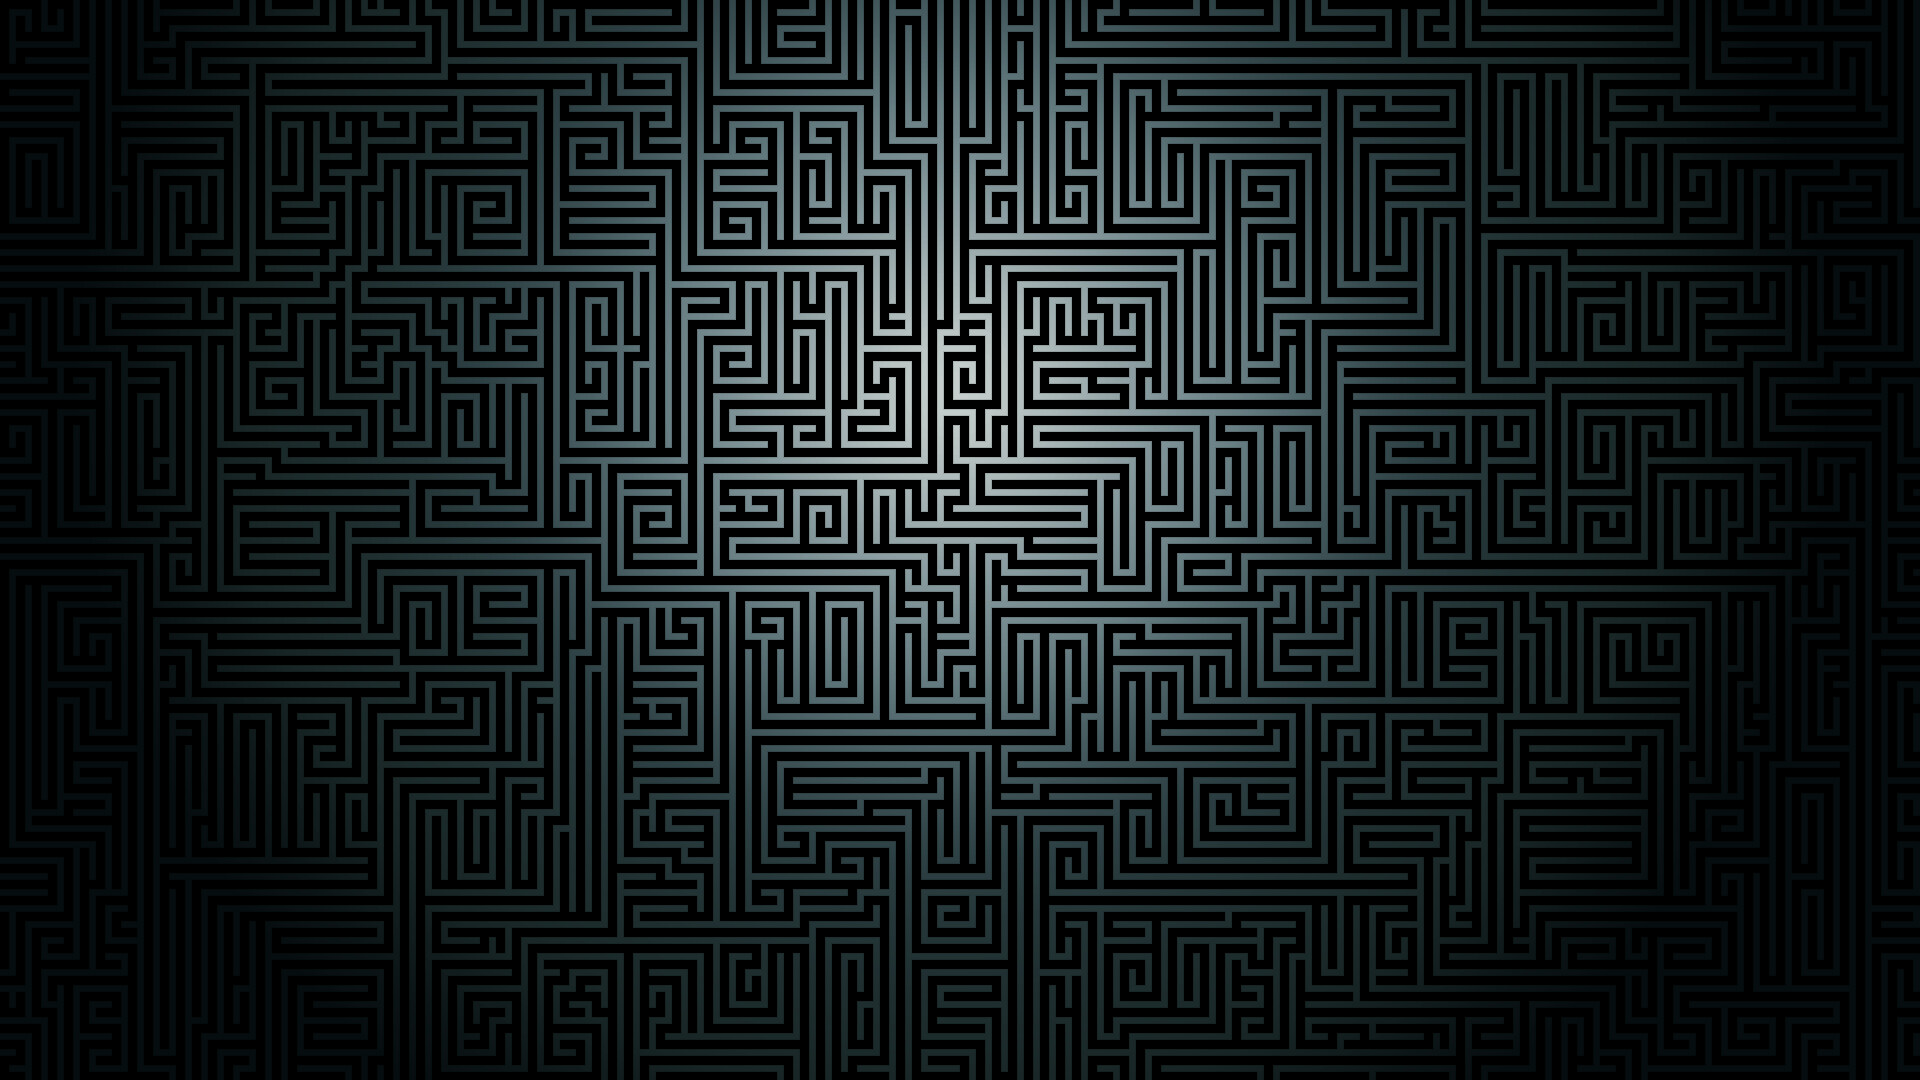 Labyrinth: Maze, A confusing intricate network of passages, Pattern. 1920x1080 Full HD Wallpaper.